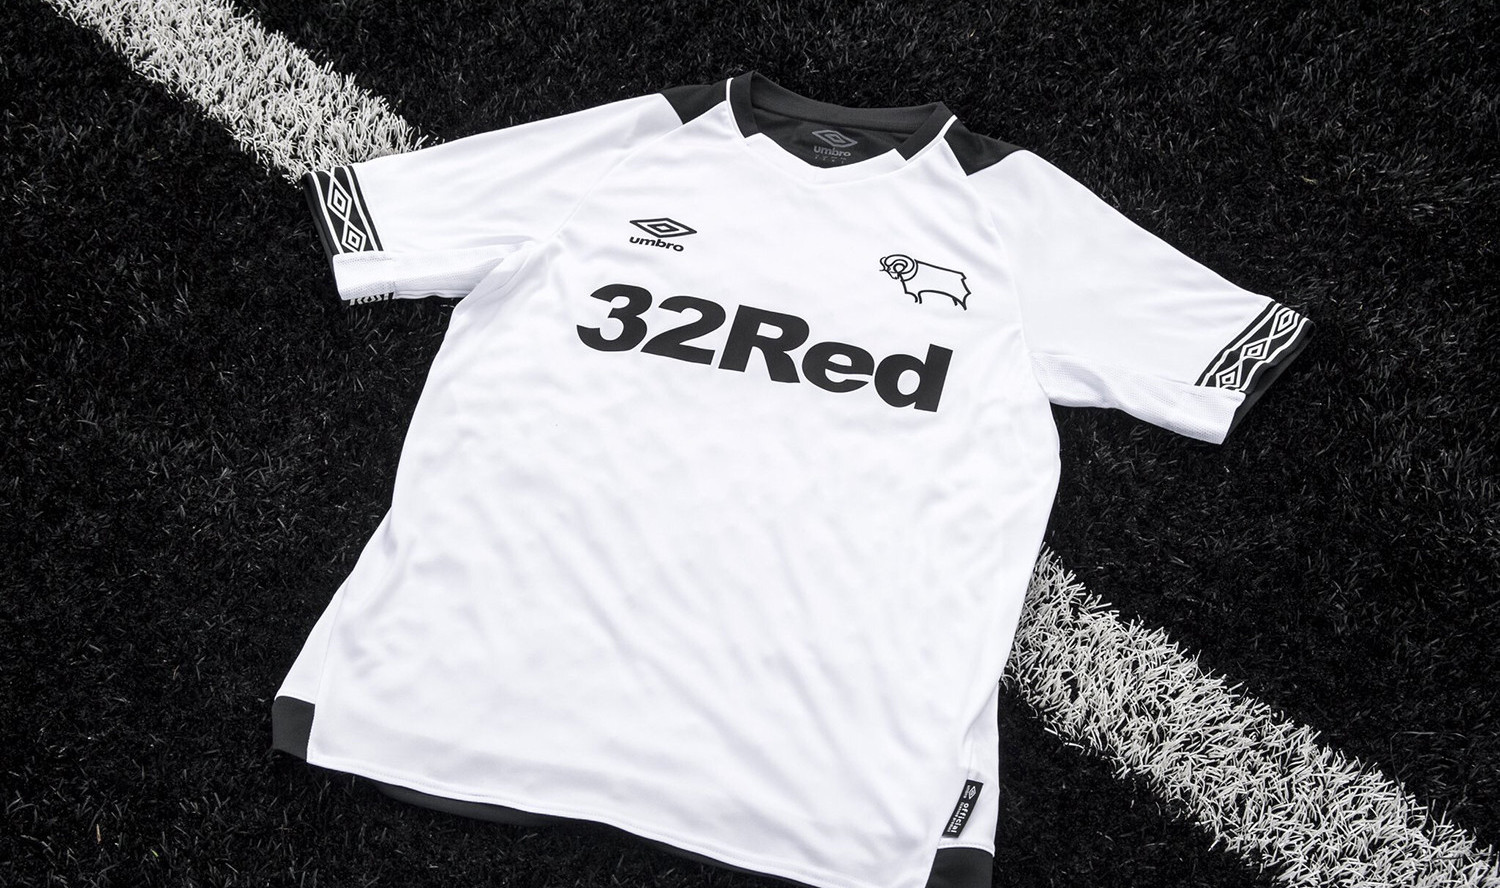 Derby County thuisshirt 2018-2019 - Voetbalshirts.com